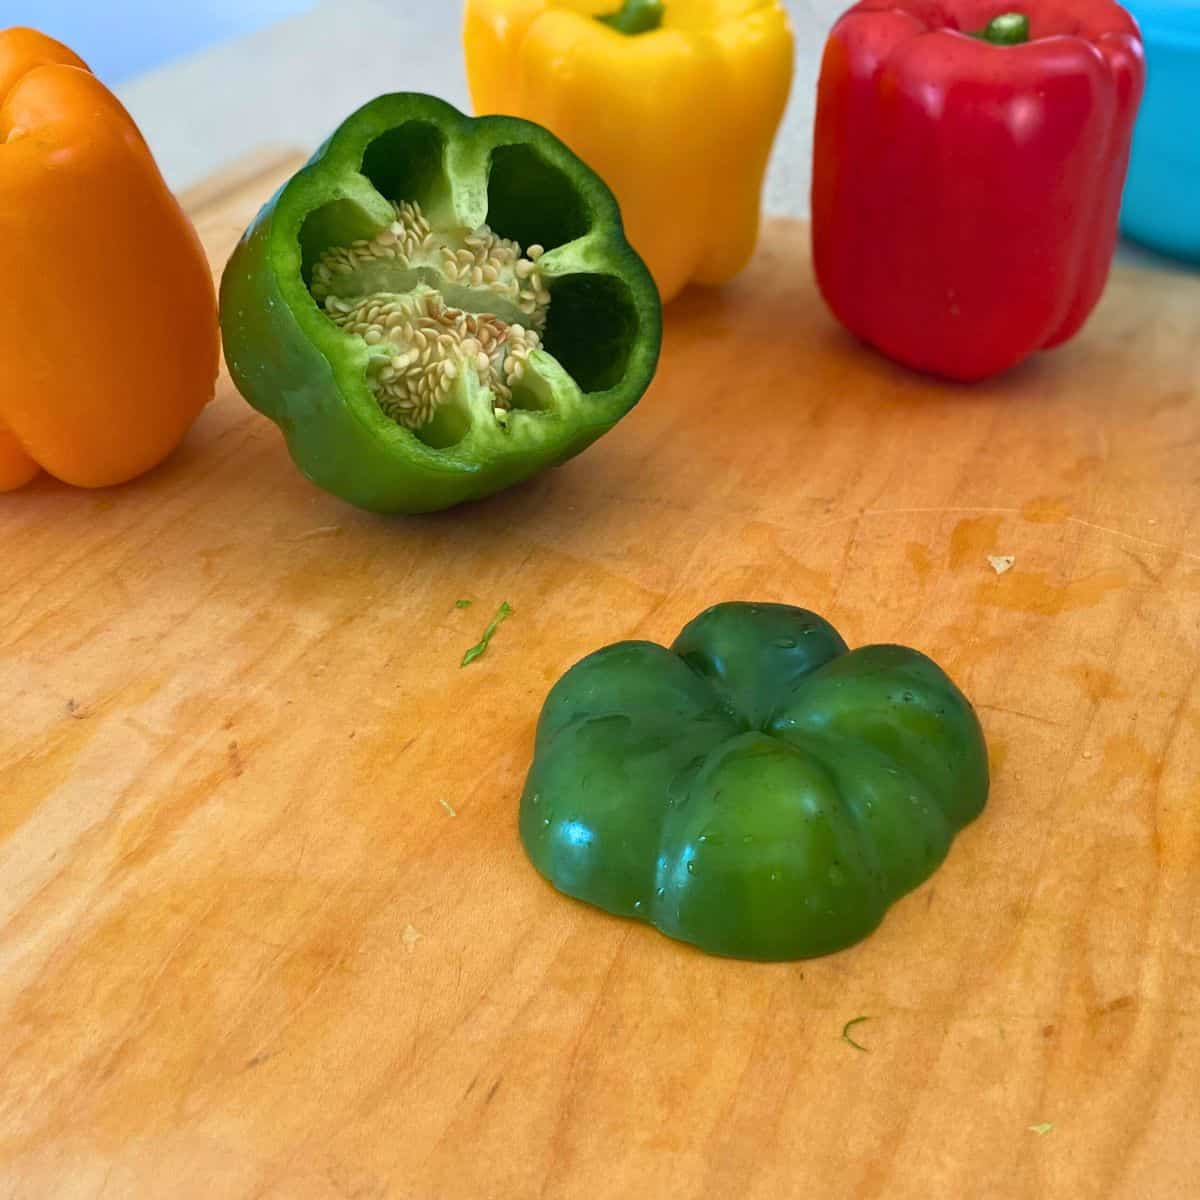 A green bell pepper with the bottom cut off and the seeds and membrane exposed.